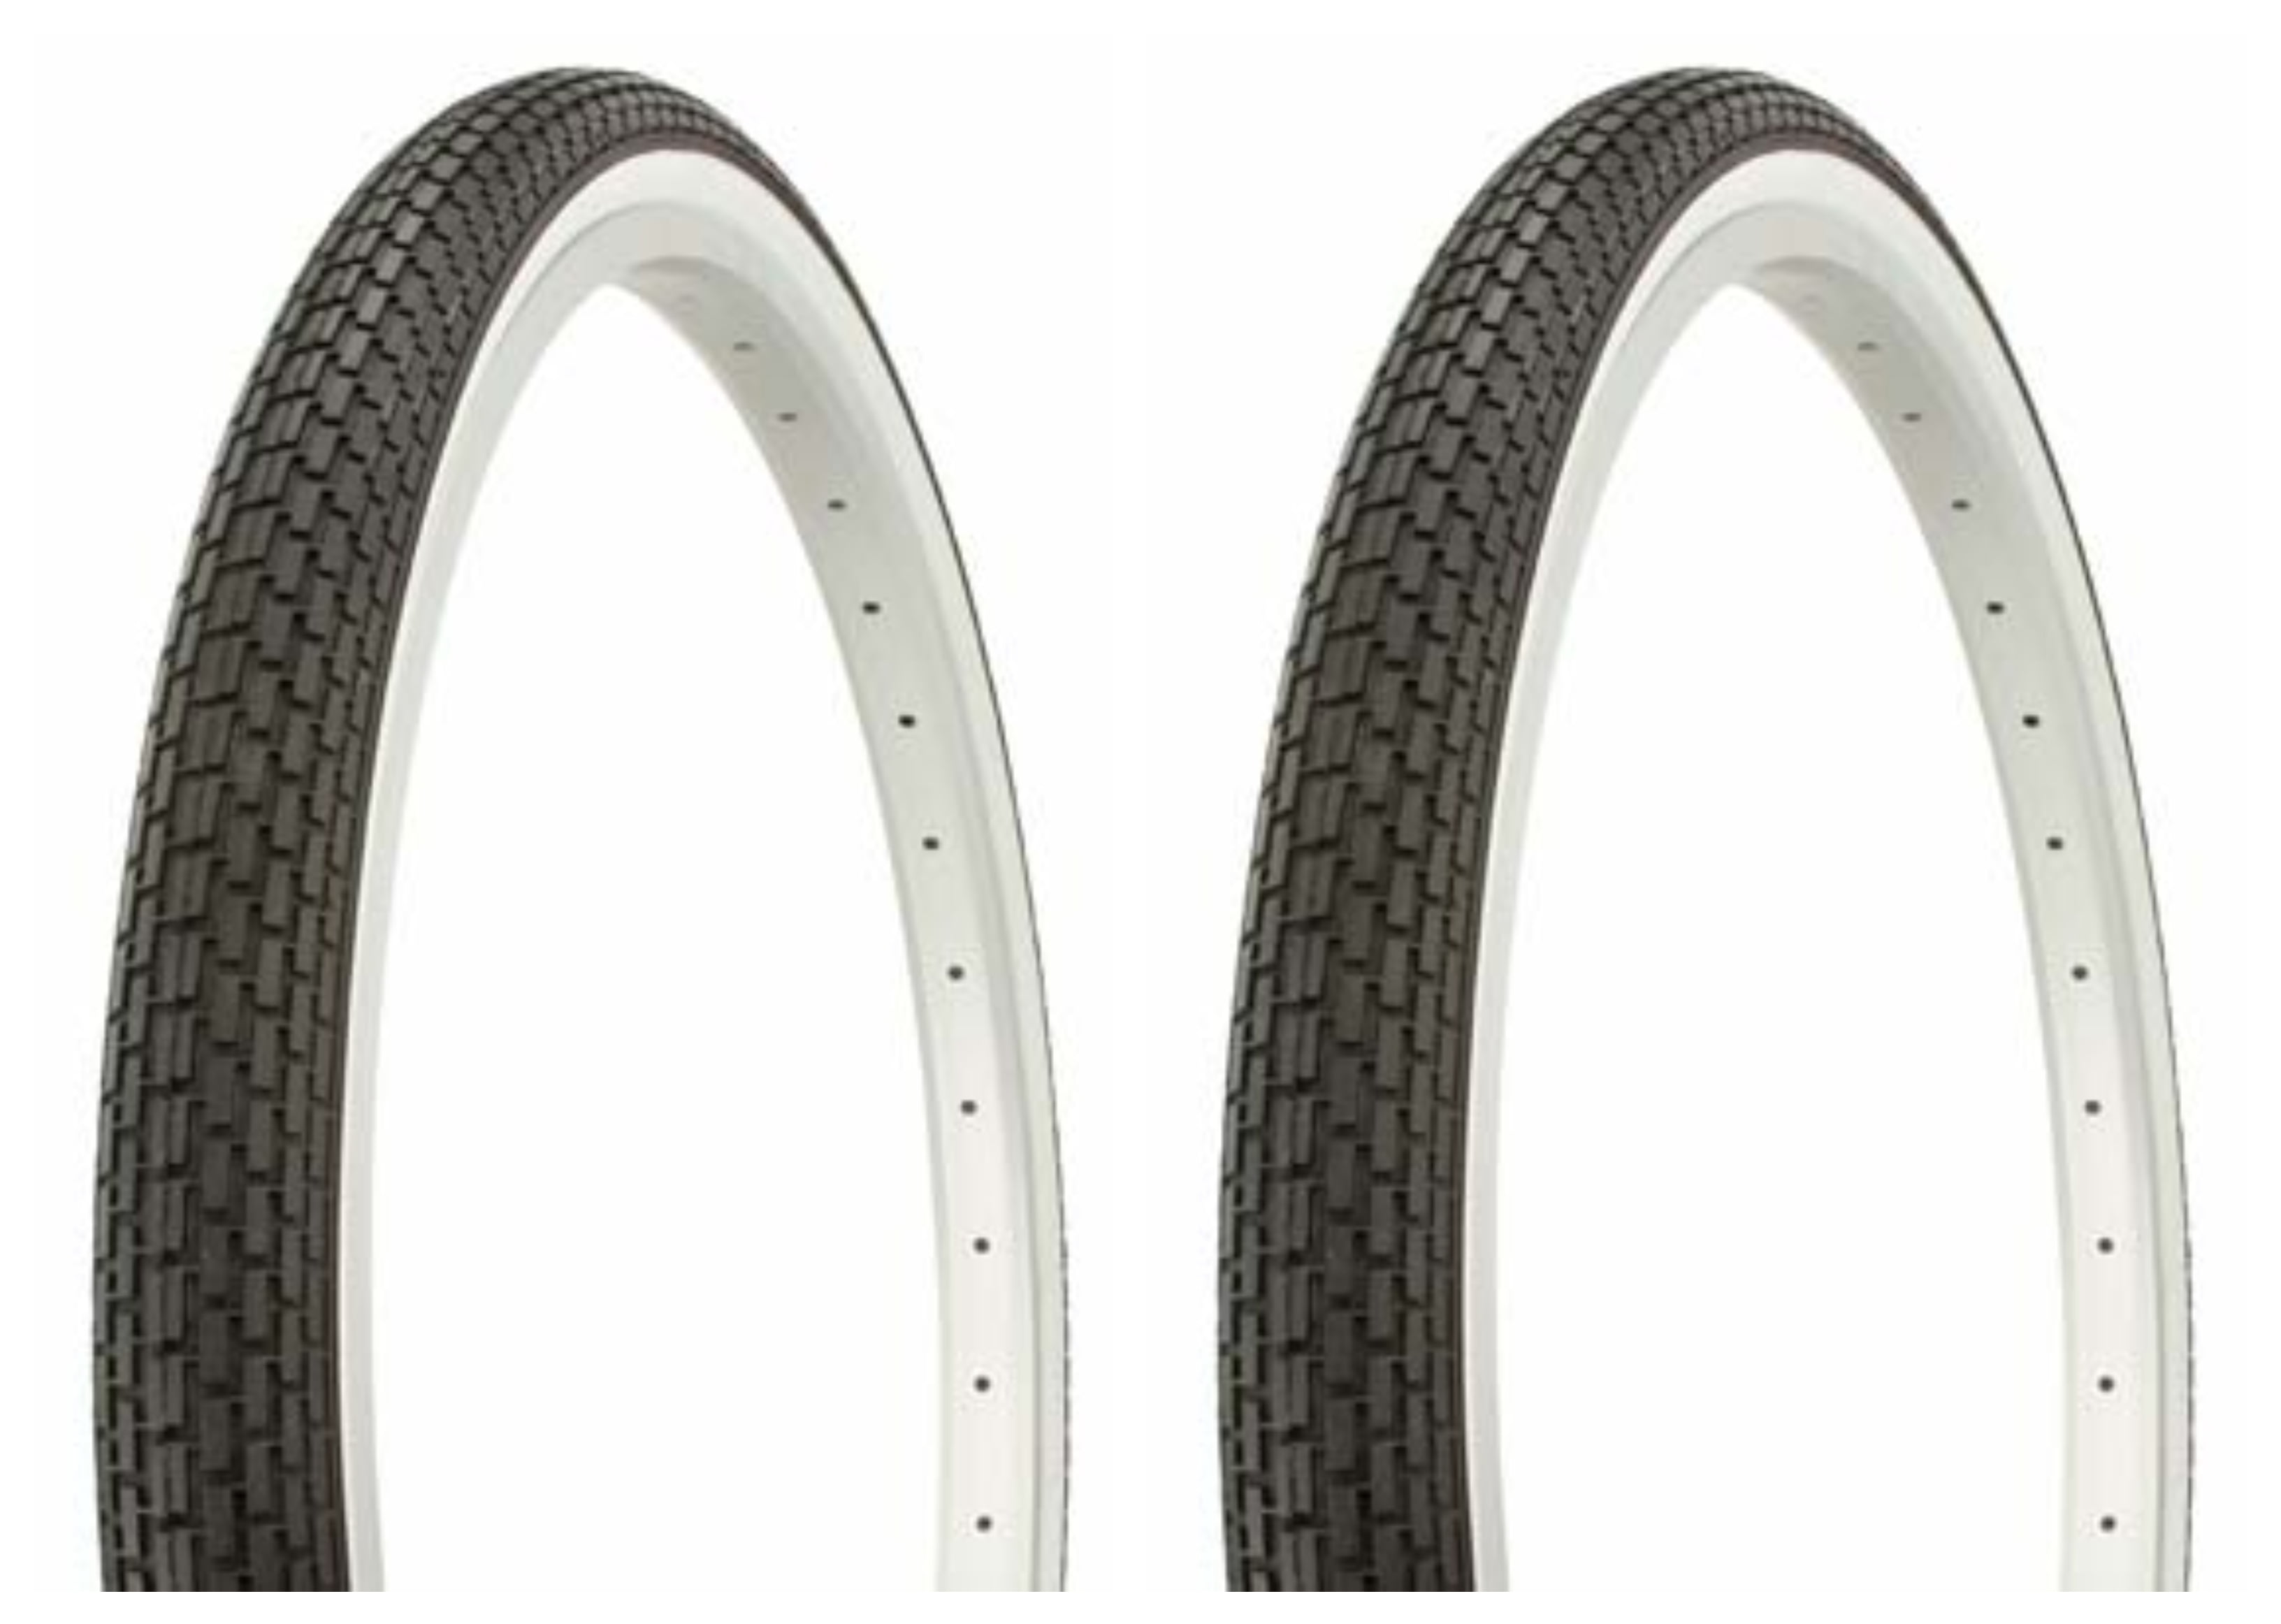 CREAM SIDE WALL HF-120A TWO DURO BICYCLE TIRES 26"x2.125" CLAY 2 